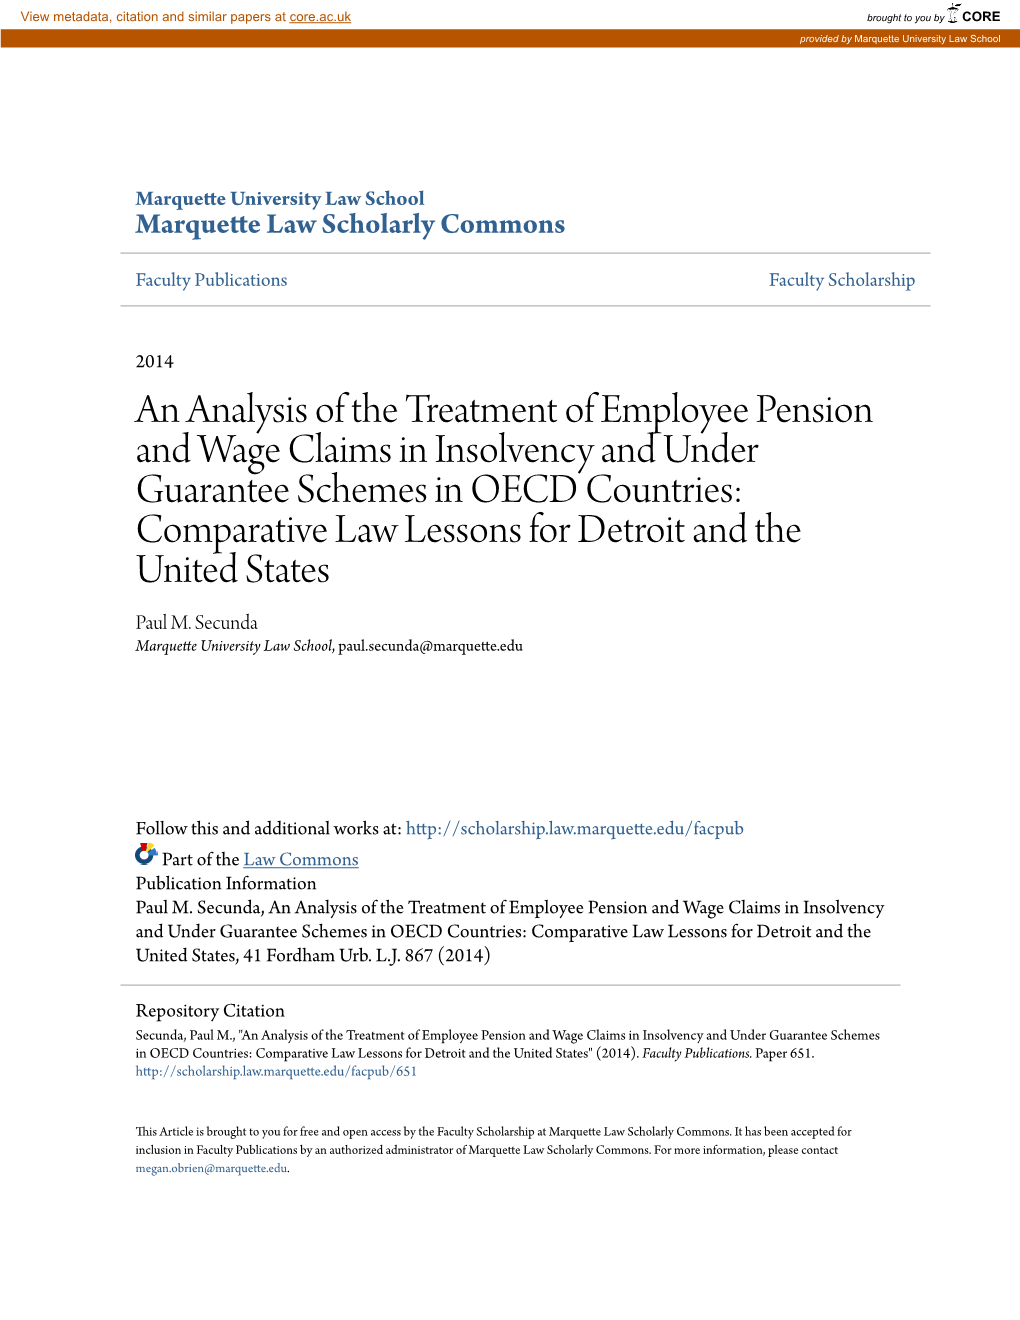 An Analysis of the Treatment of Employee Pension and Wage